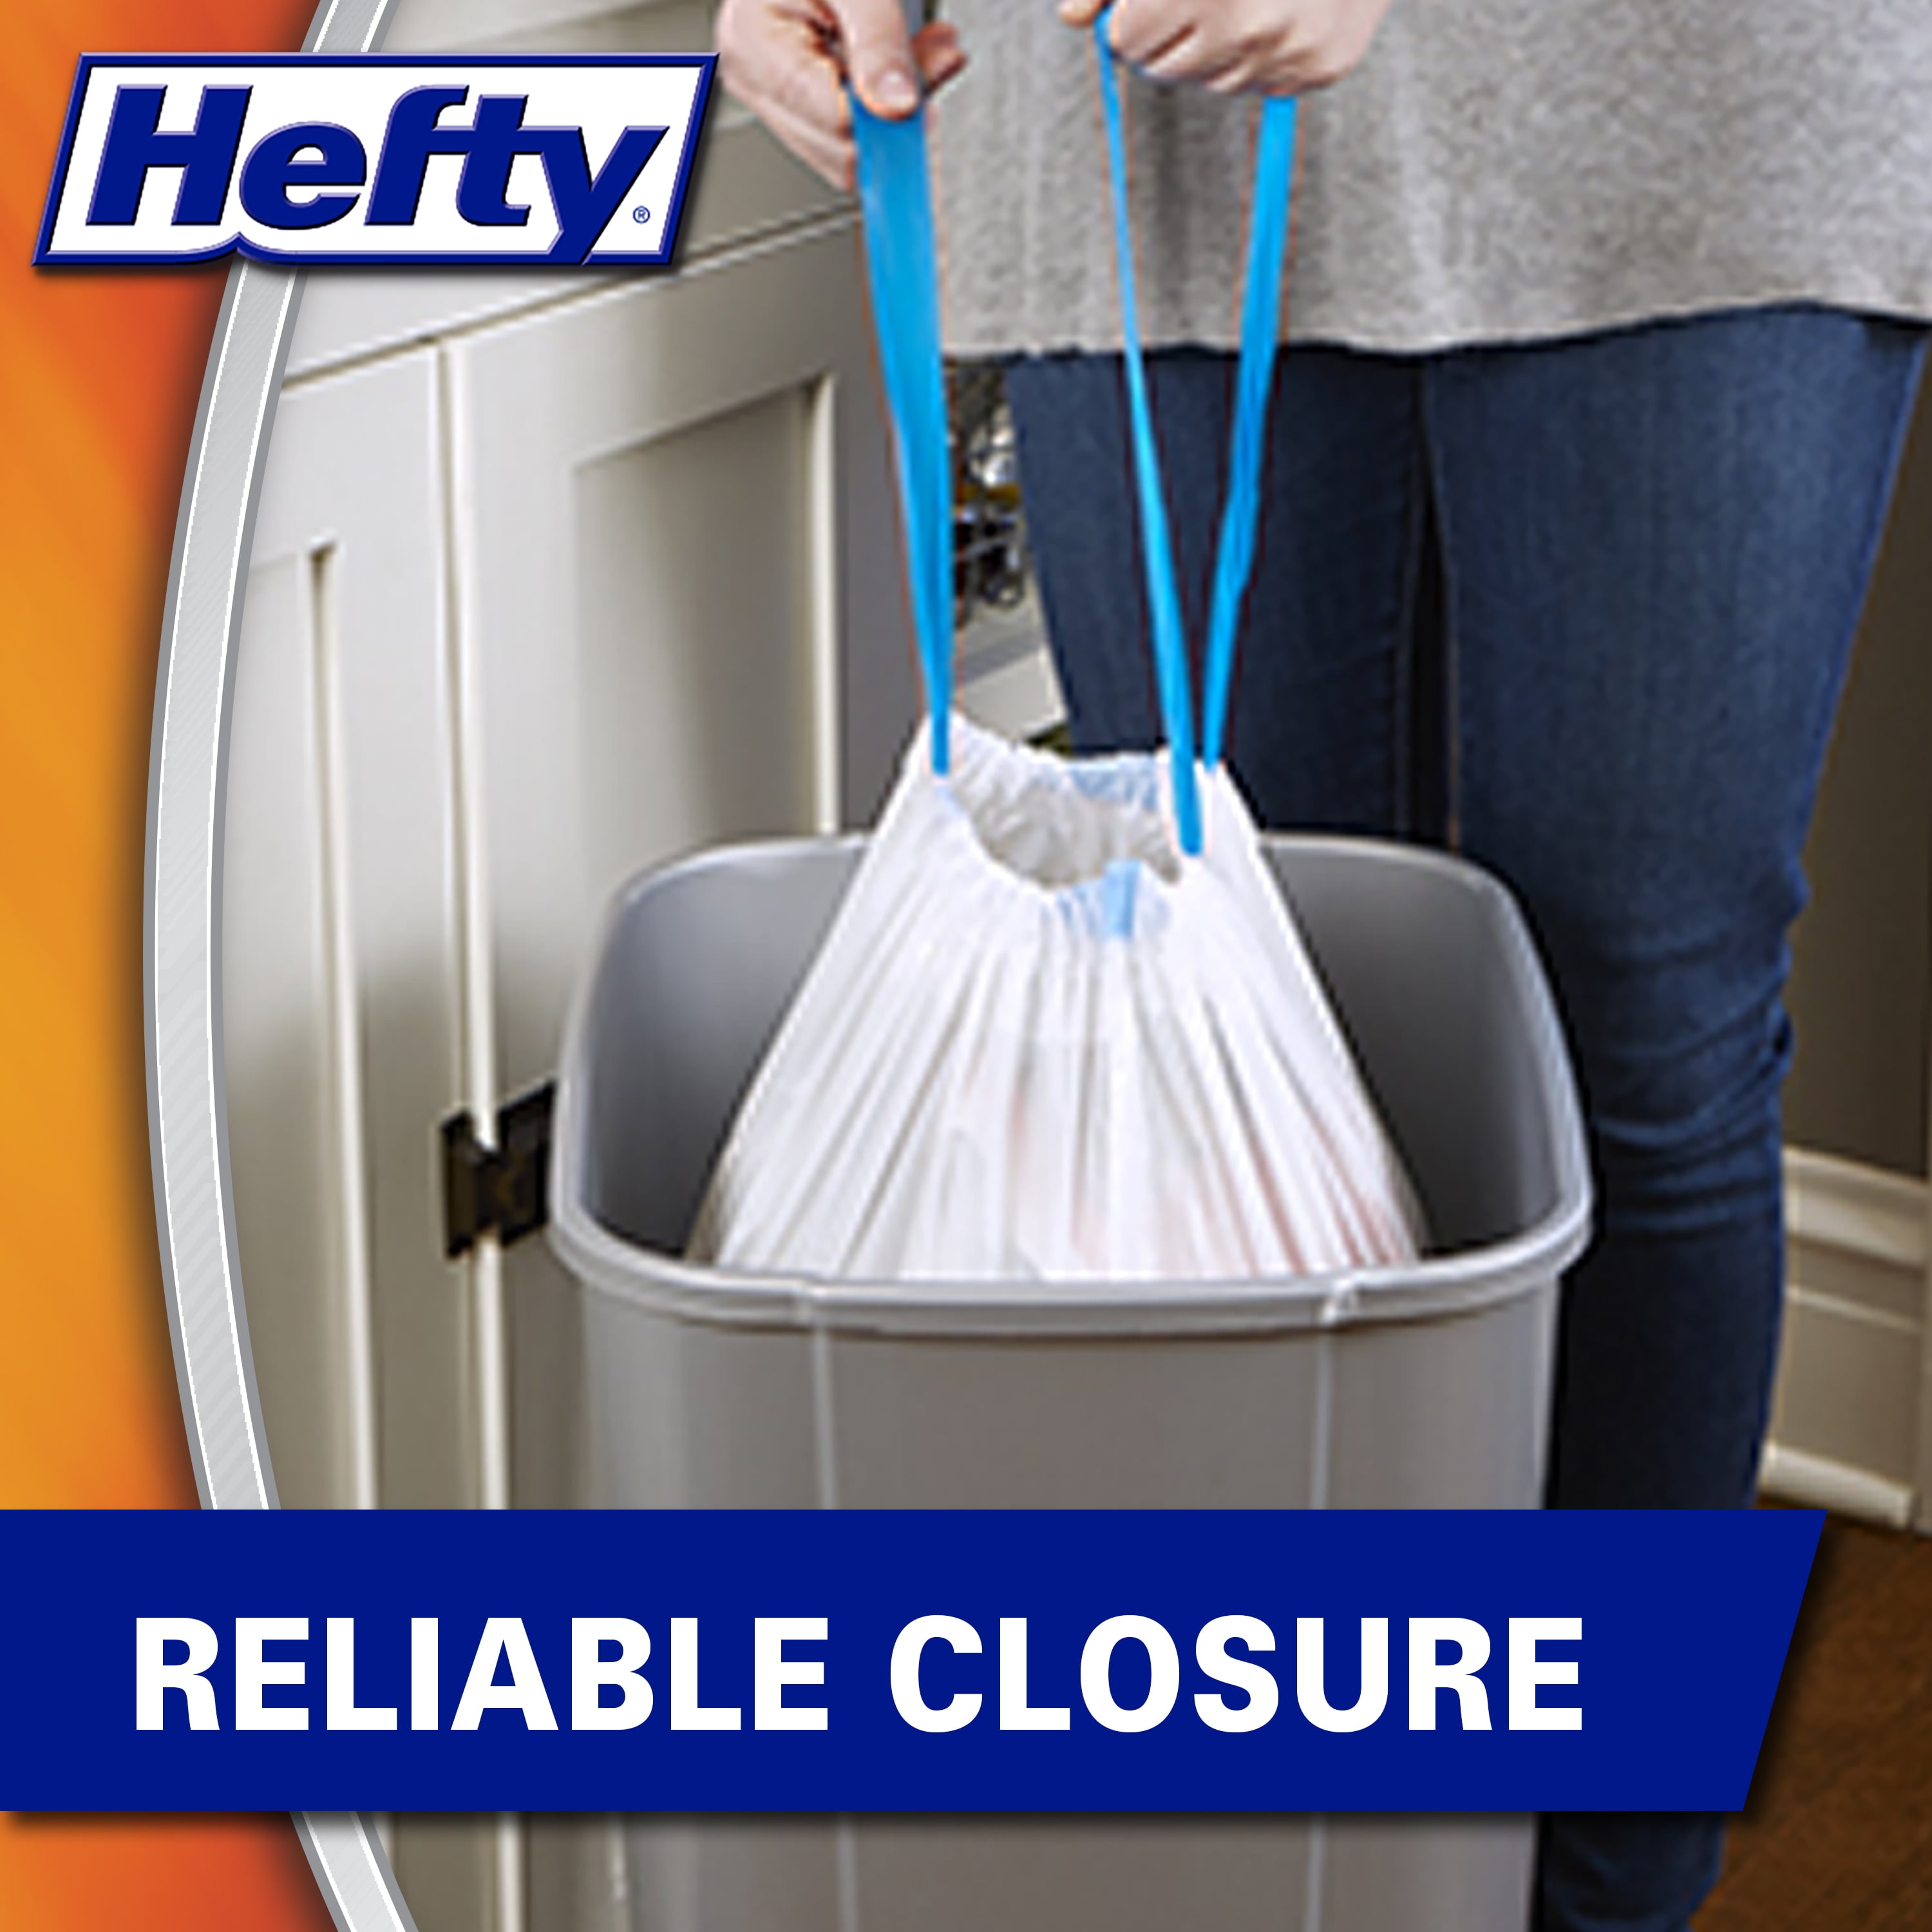 Hefty Ultra Strong Tall Kitchen Trash Bags, Clean Burst Scent, 13